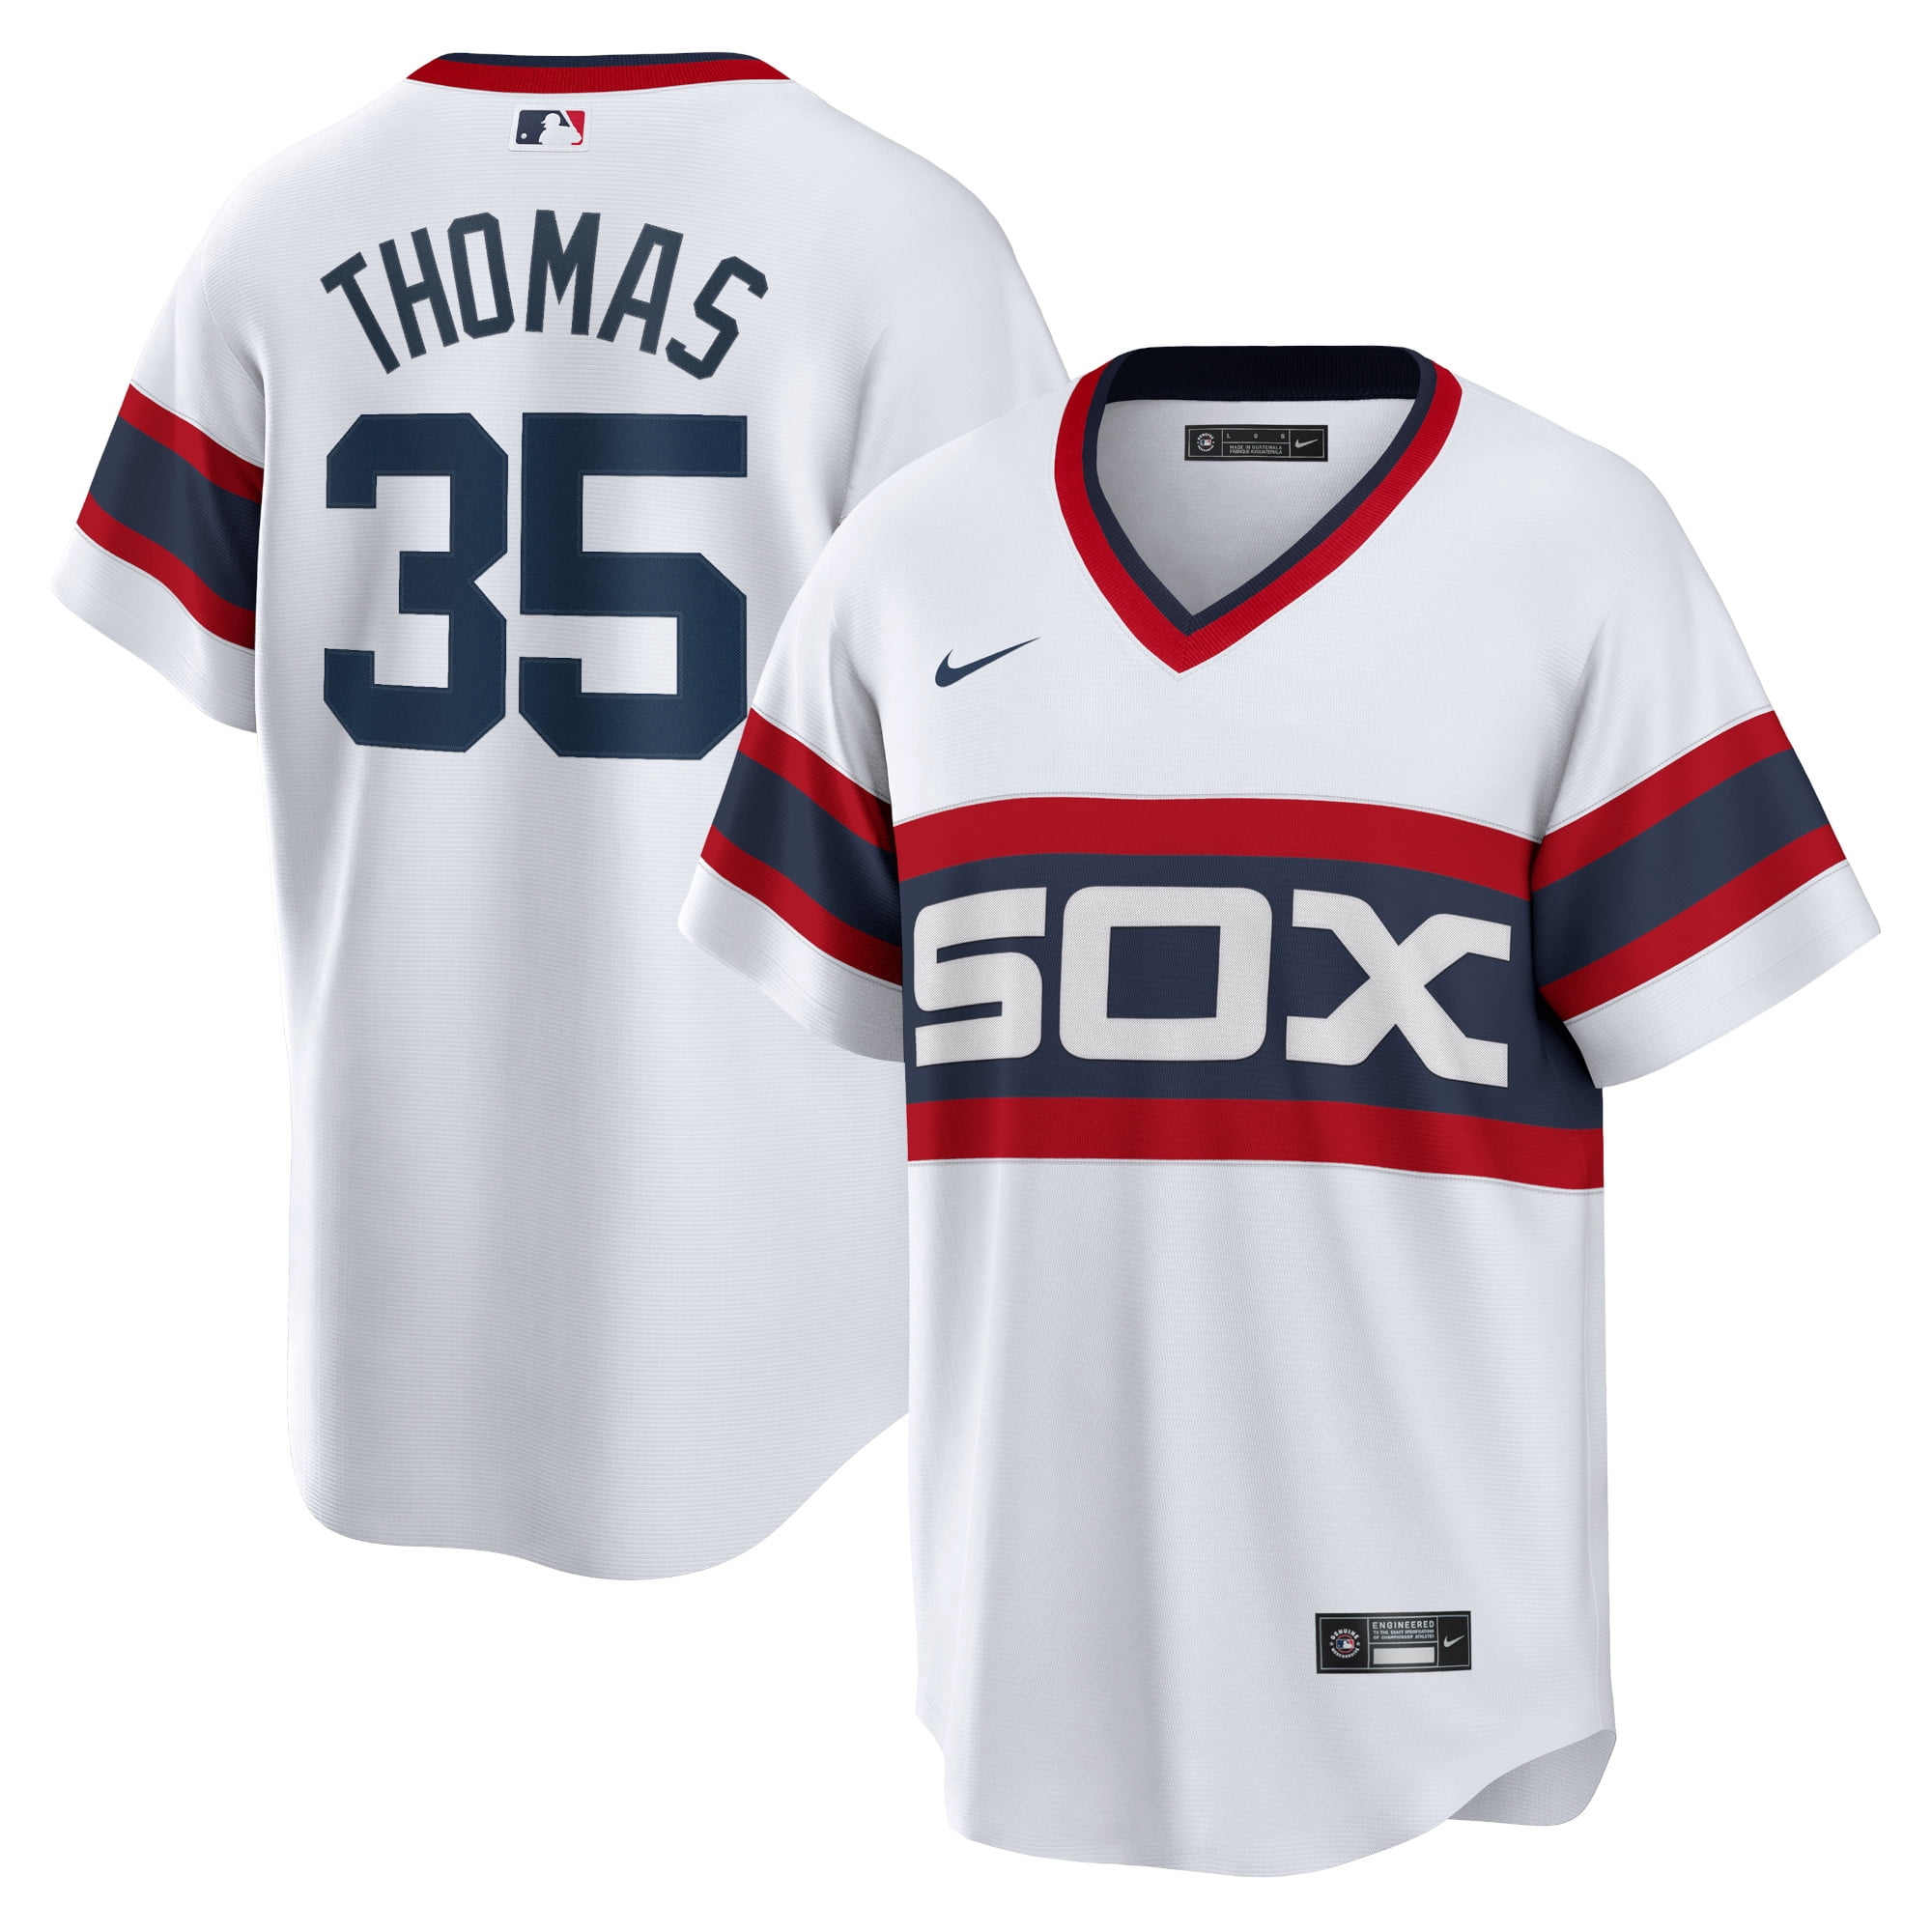 where to buy white sox jersey